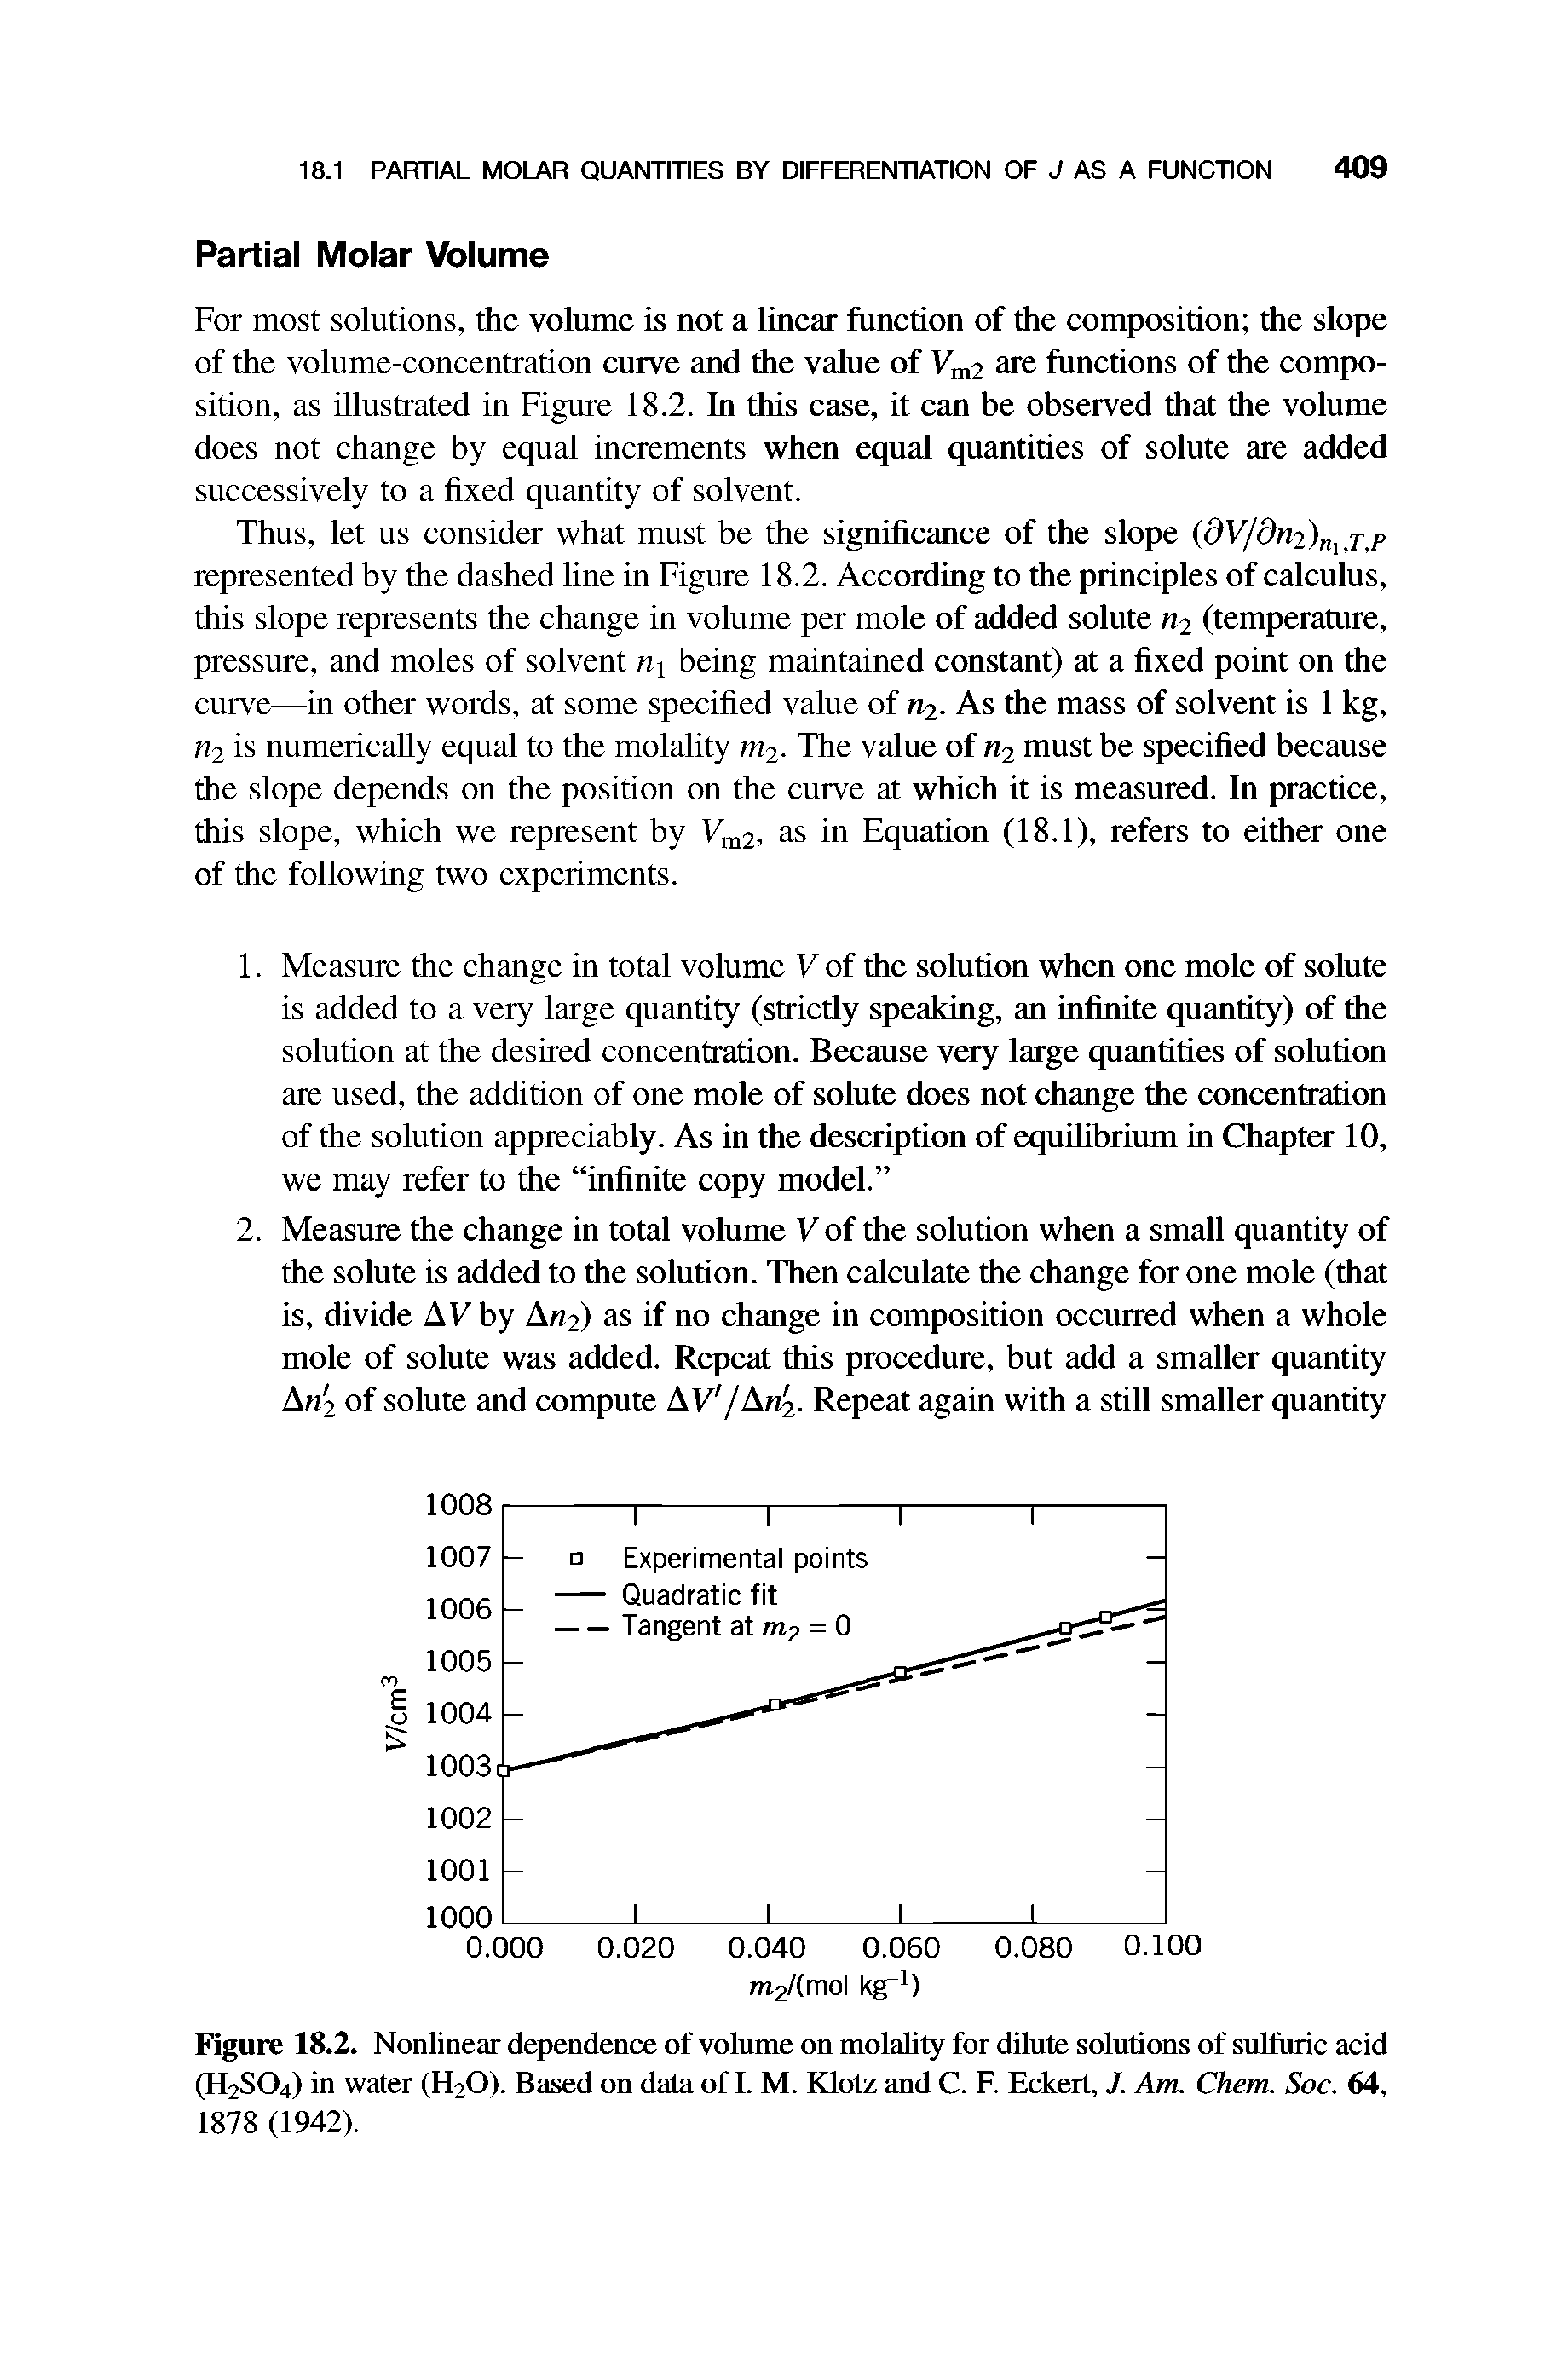 Figure 18.2. Nonlinear dependence of volume on molality for dilute solutions of sulfuric acid (H2SO4) in water (H2O). Based on data of I. M. Klotz and C. F. Eckert, J. Am. Chem. Soc. 64, 1878 (1942).